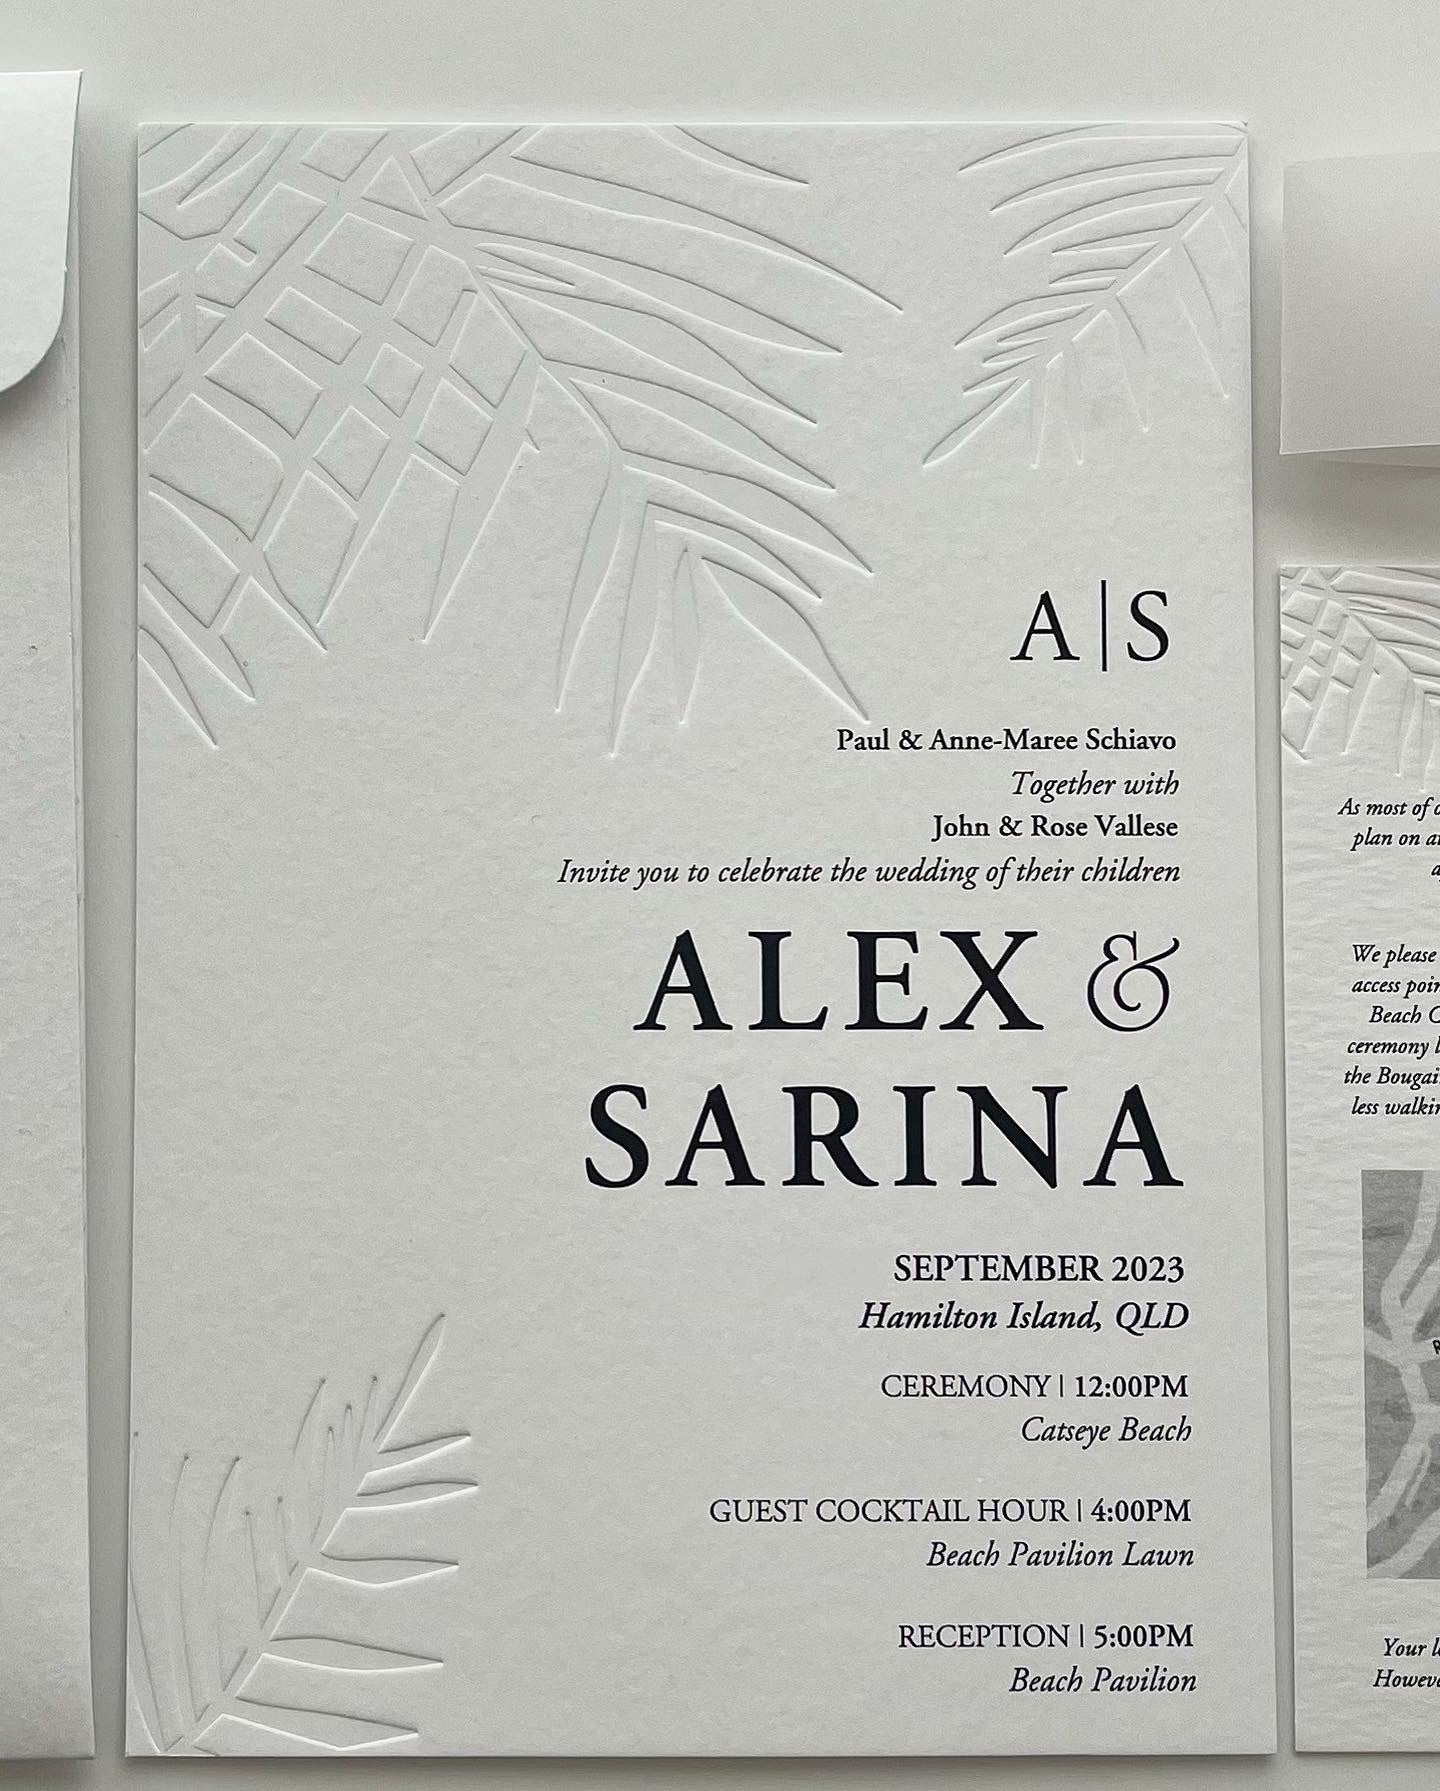 Blind & Digital Ink Print Invitations/Save the dates - FZK & Co. Event Paper